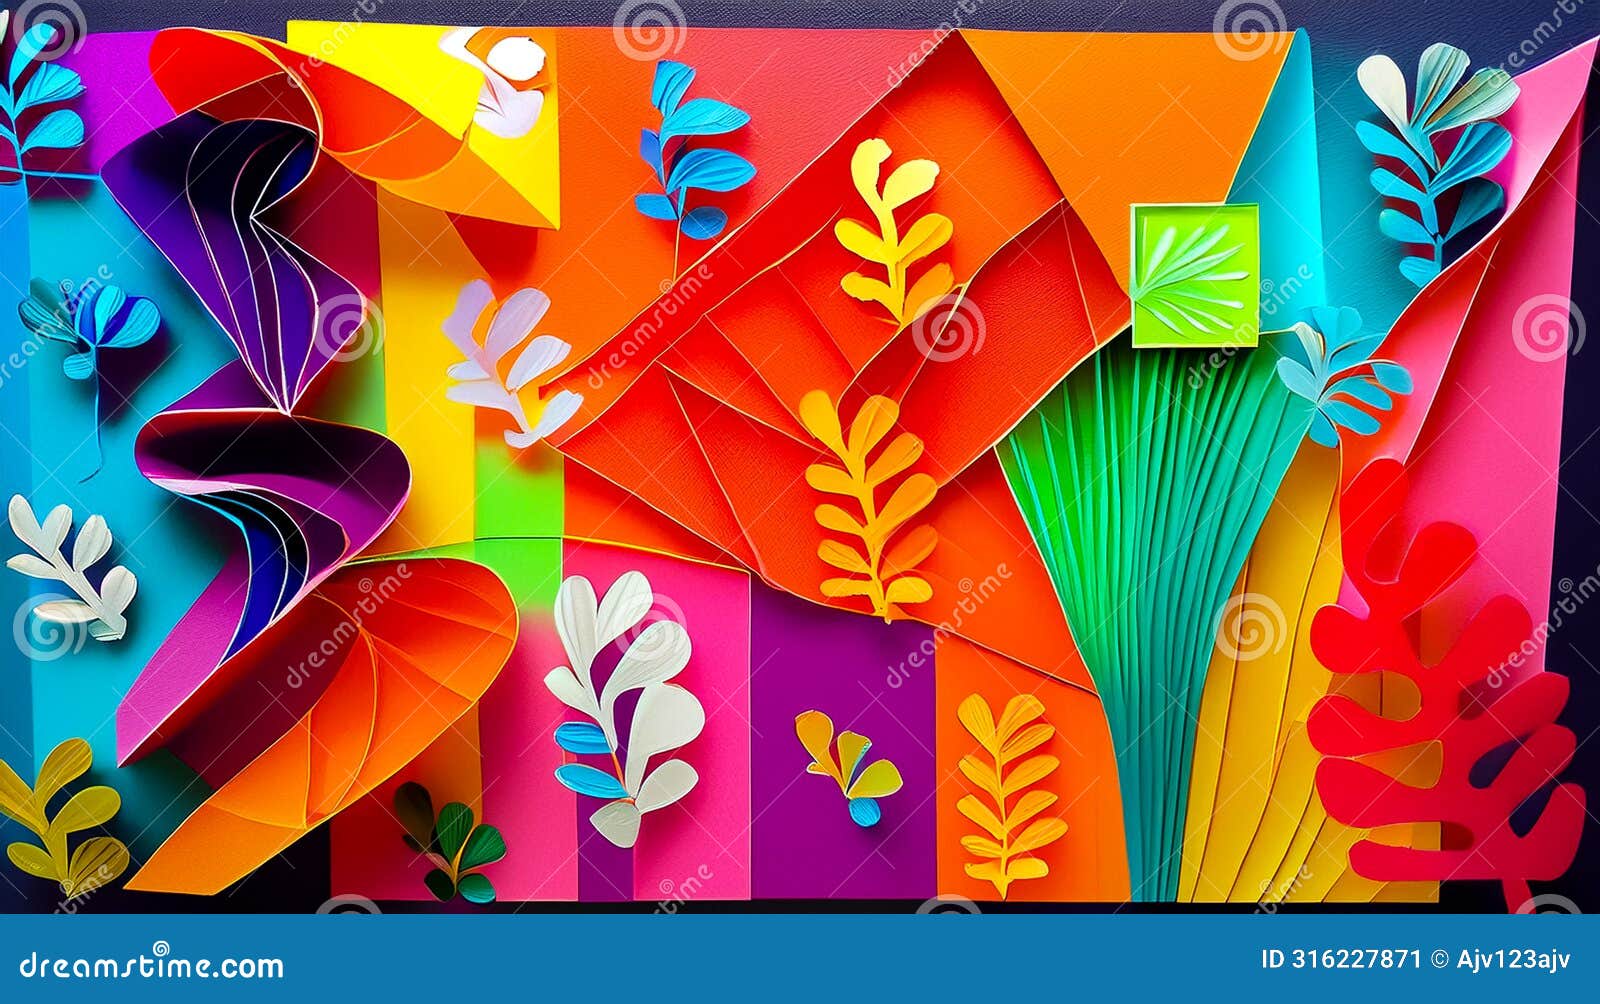 an colourful abstract art piece of cut out s